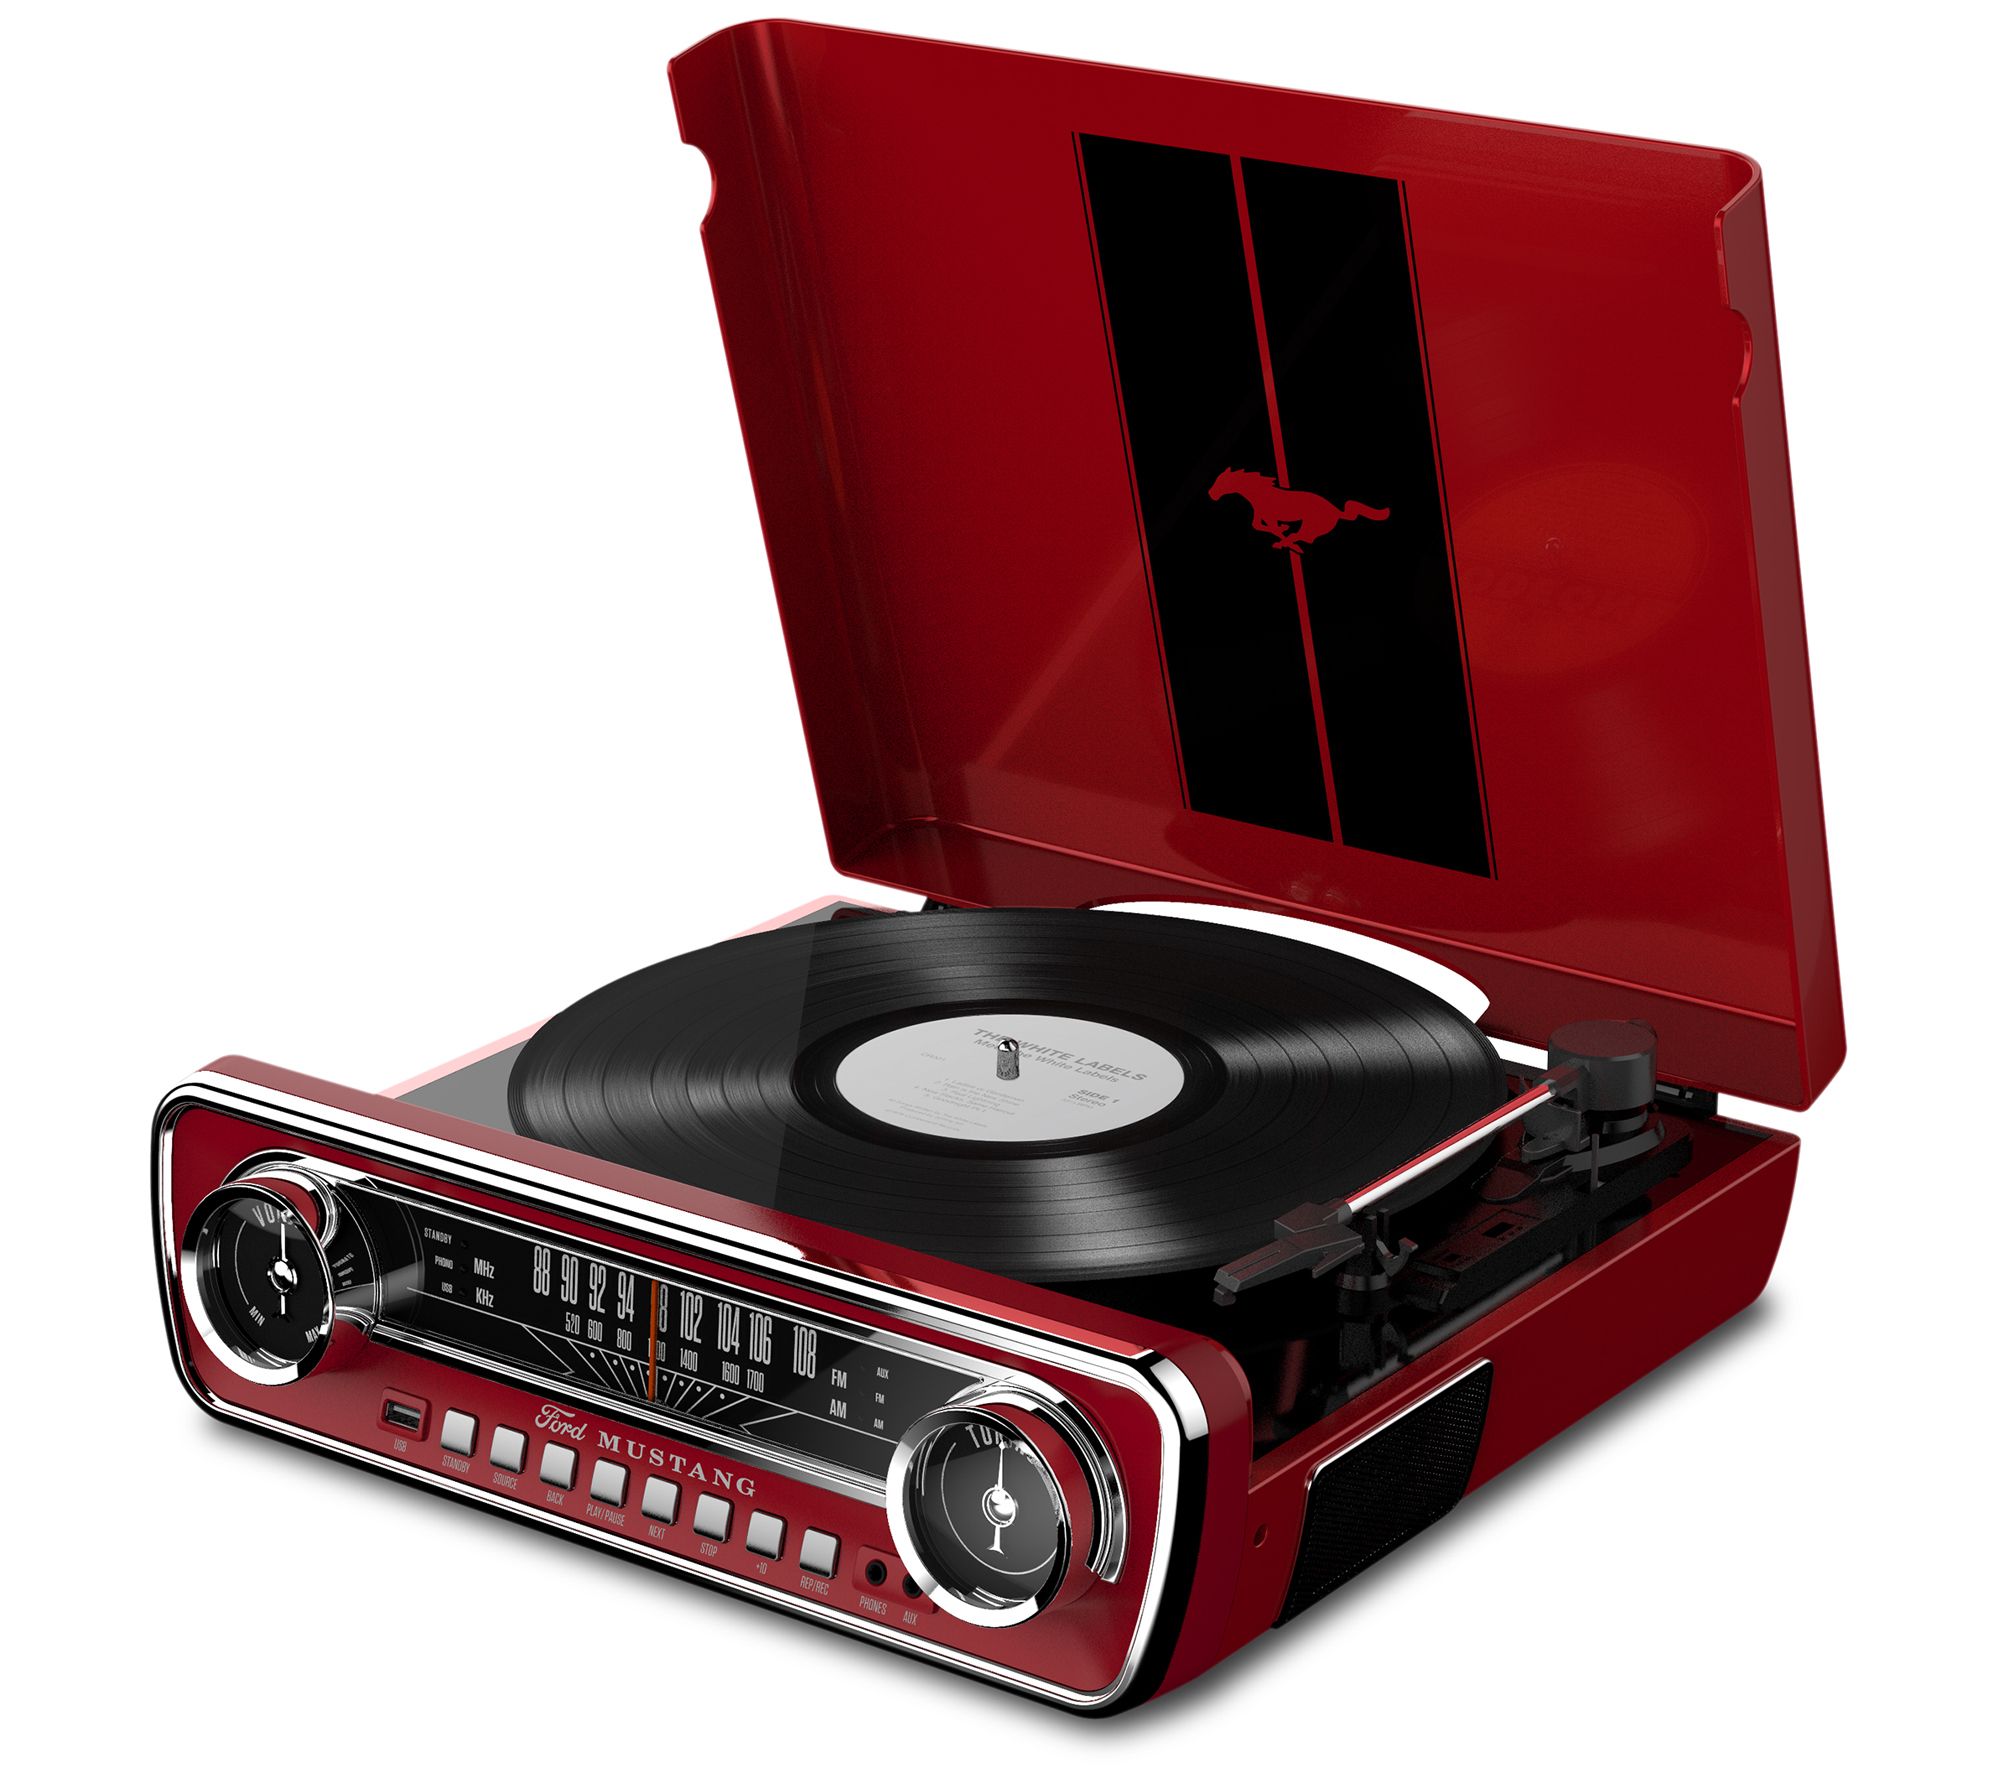 Retro Vinyl Record Cutting Board by Inspired Images